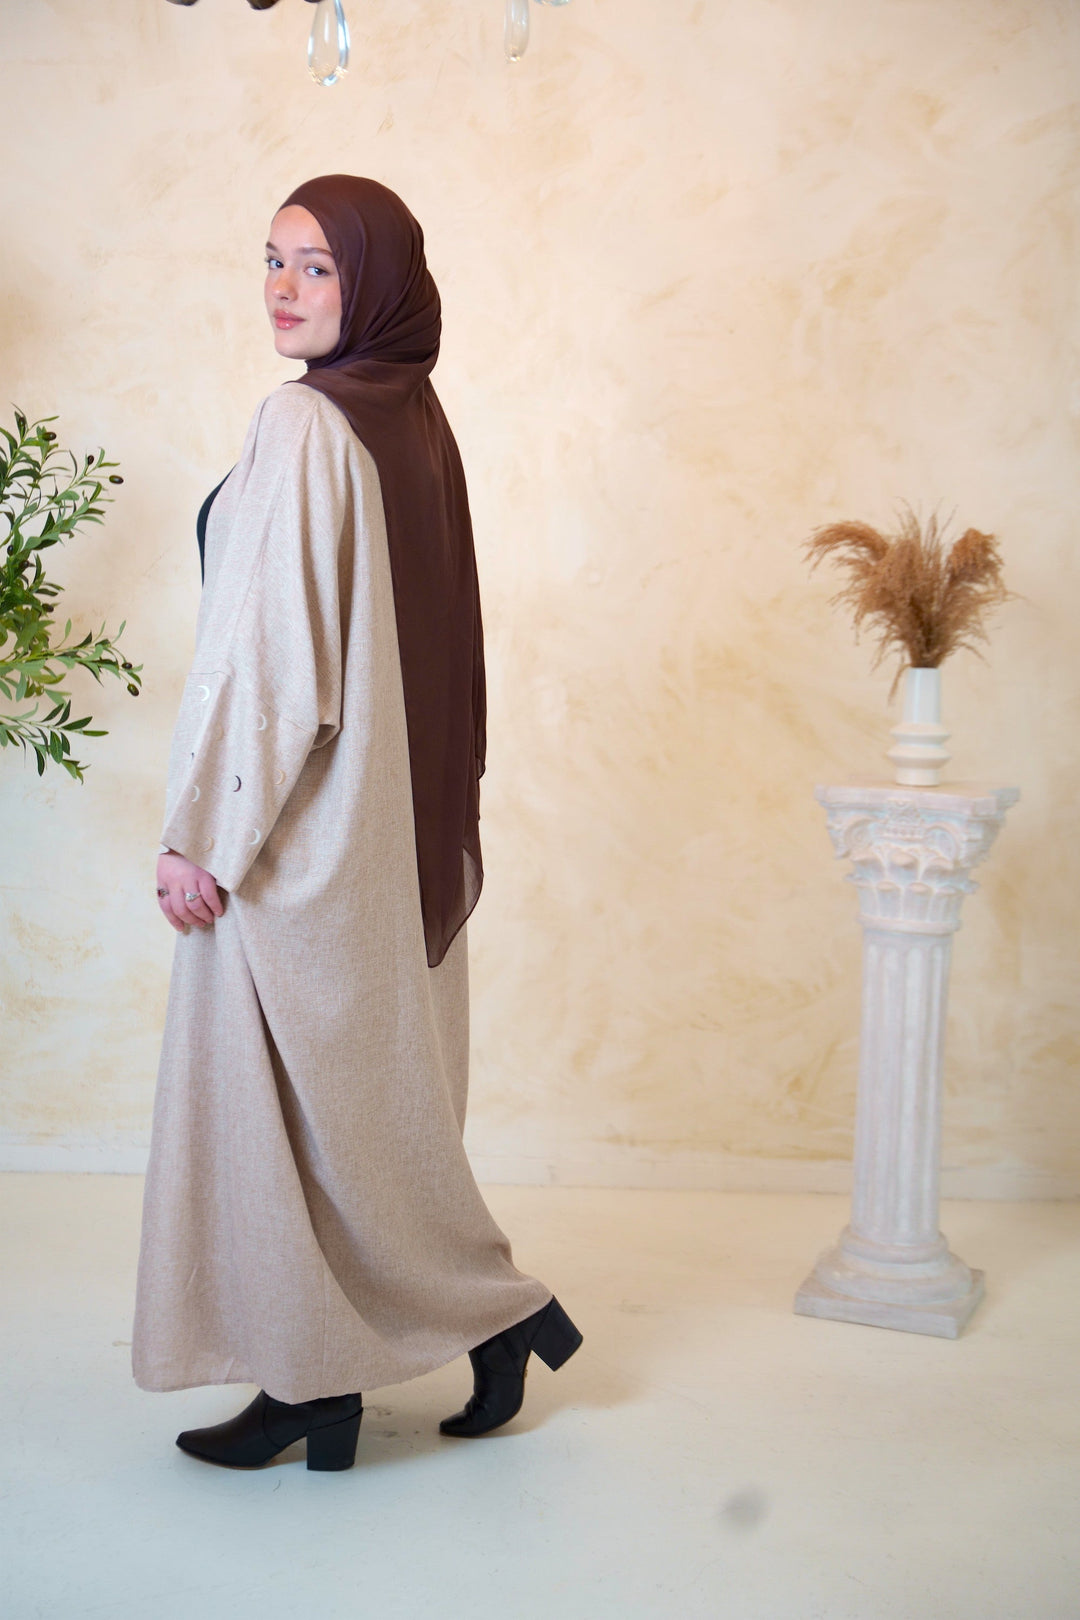 a woman in a hijab is standing in a room